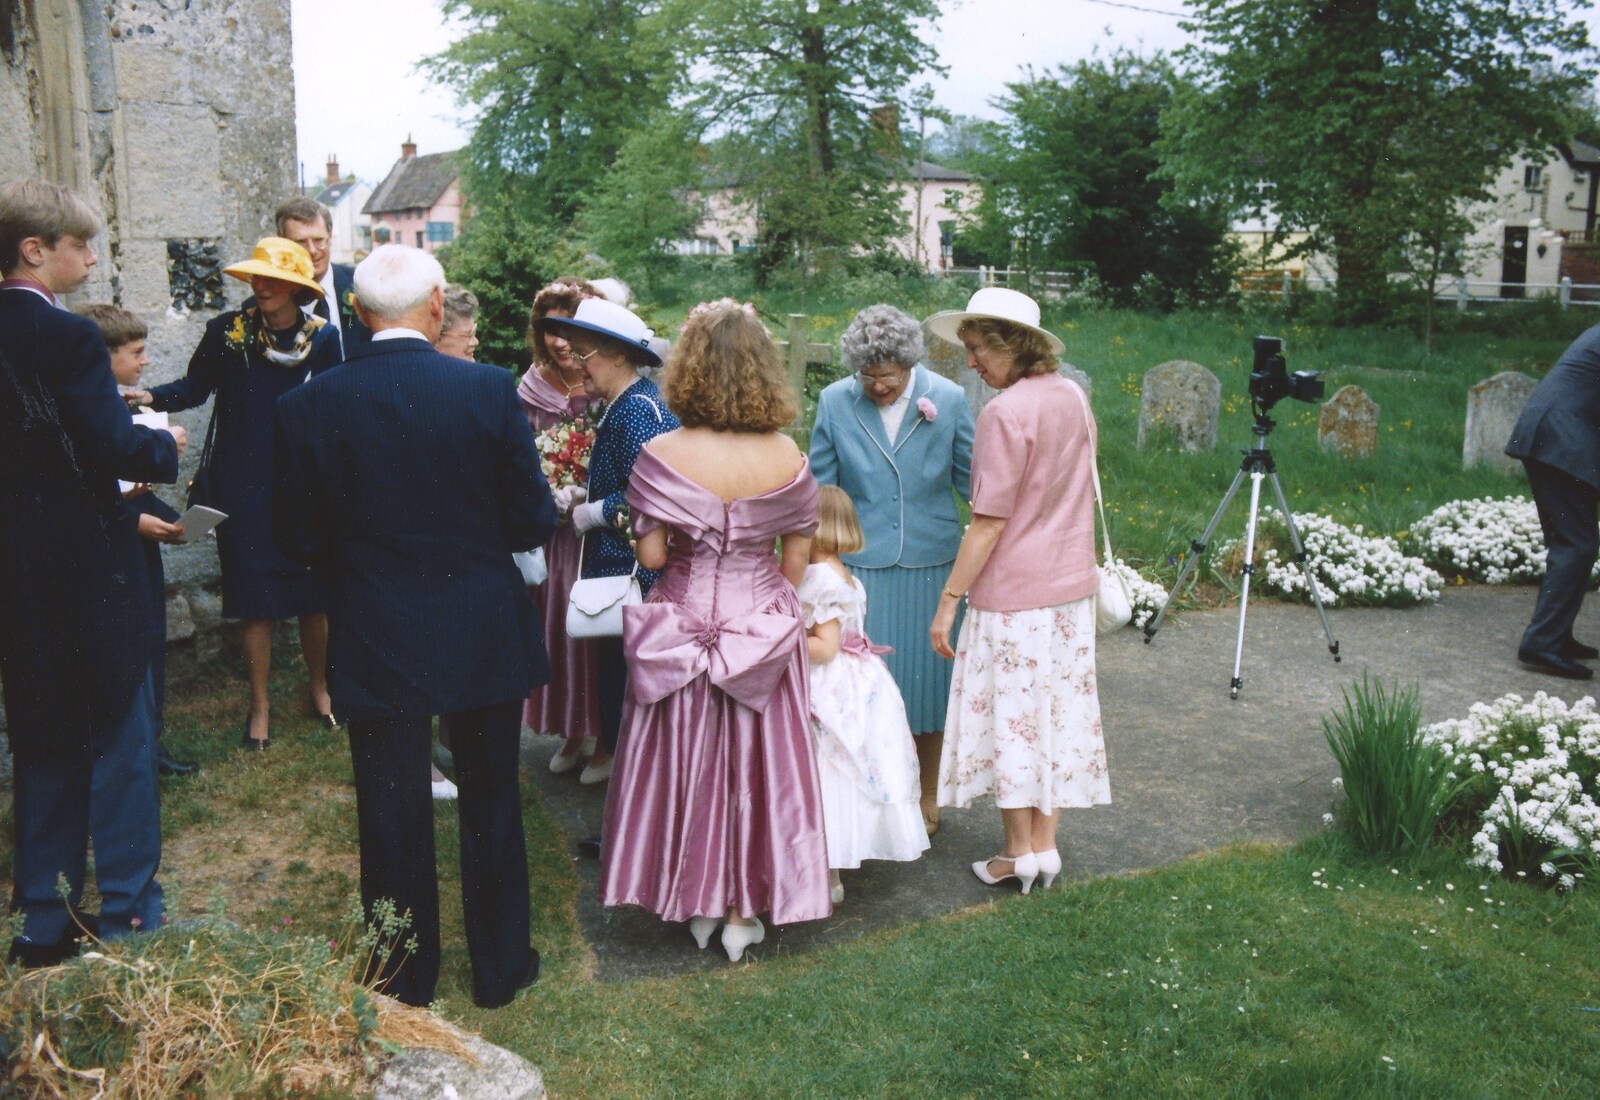 Milling around outside the church from Debbie's Wedding, Suffolk - 12th June 1999